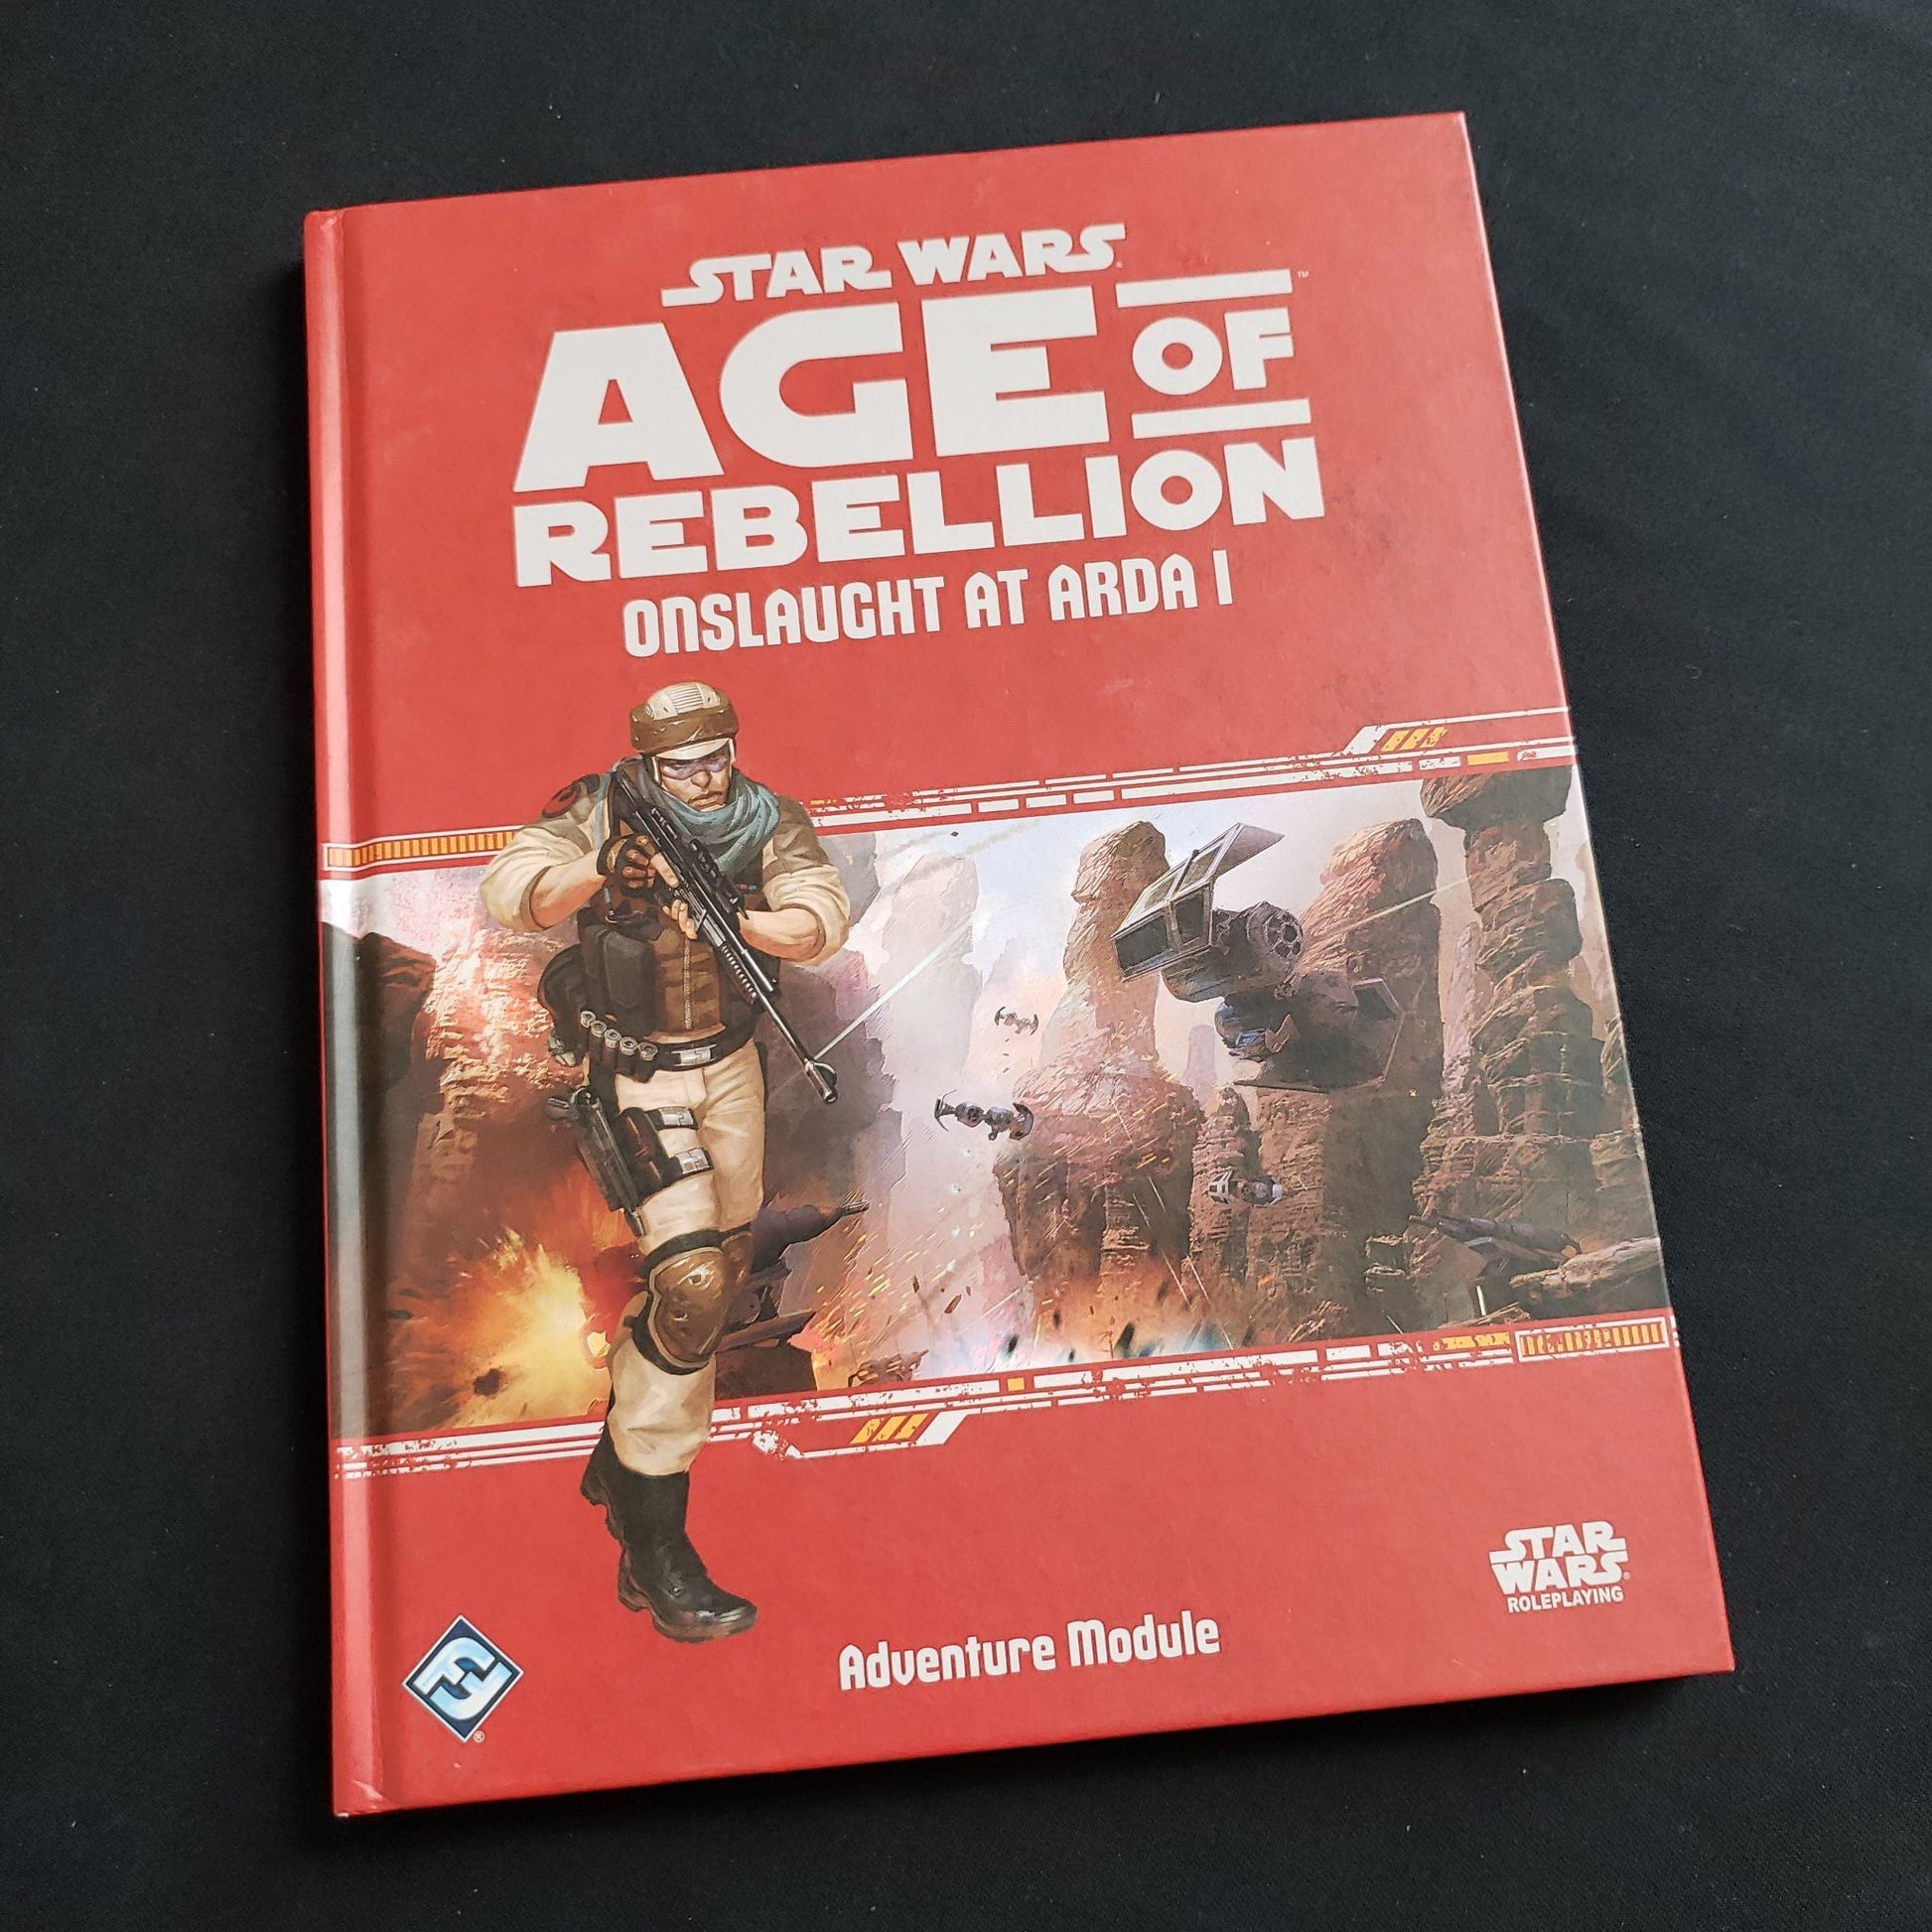 Star Wars Age of Rebellion roleplaying game - front cover of Onslaught at Arda I book